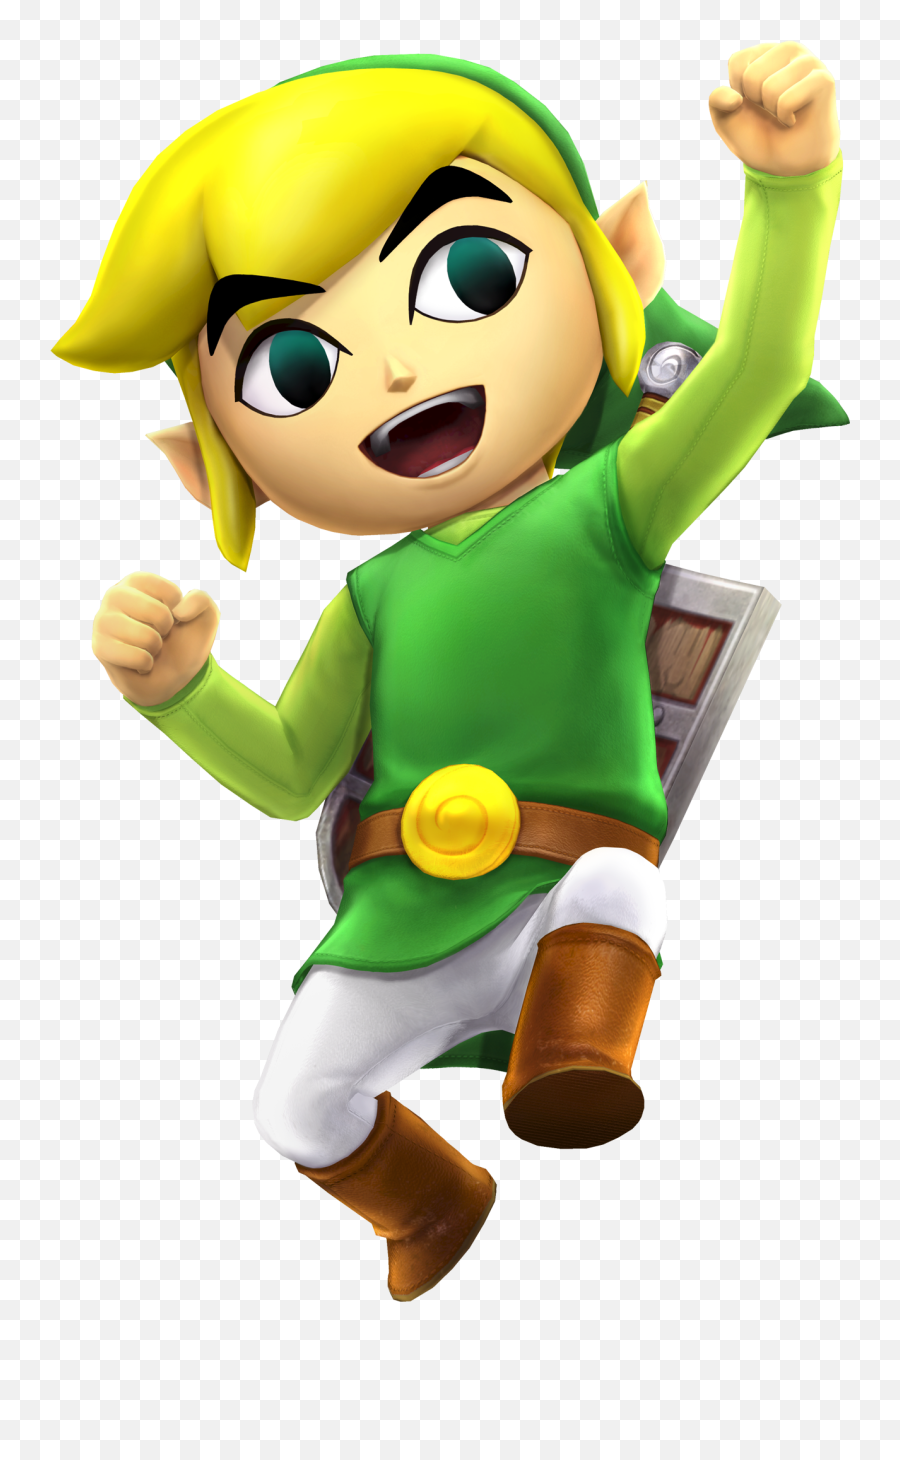 Full Size Of How To Draw Toon Links Face Link From Clipart - Toon Link In Hyrule Warriors Emoji,Caterpillar Emoji Pillow